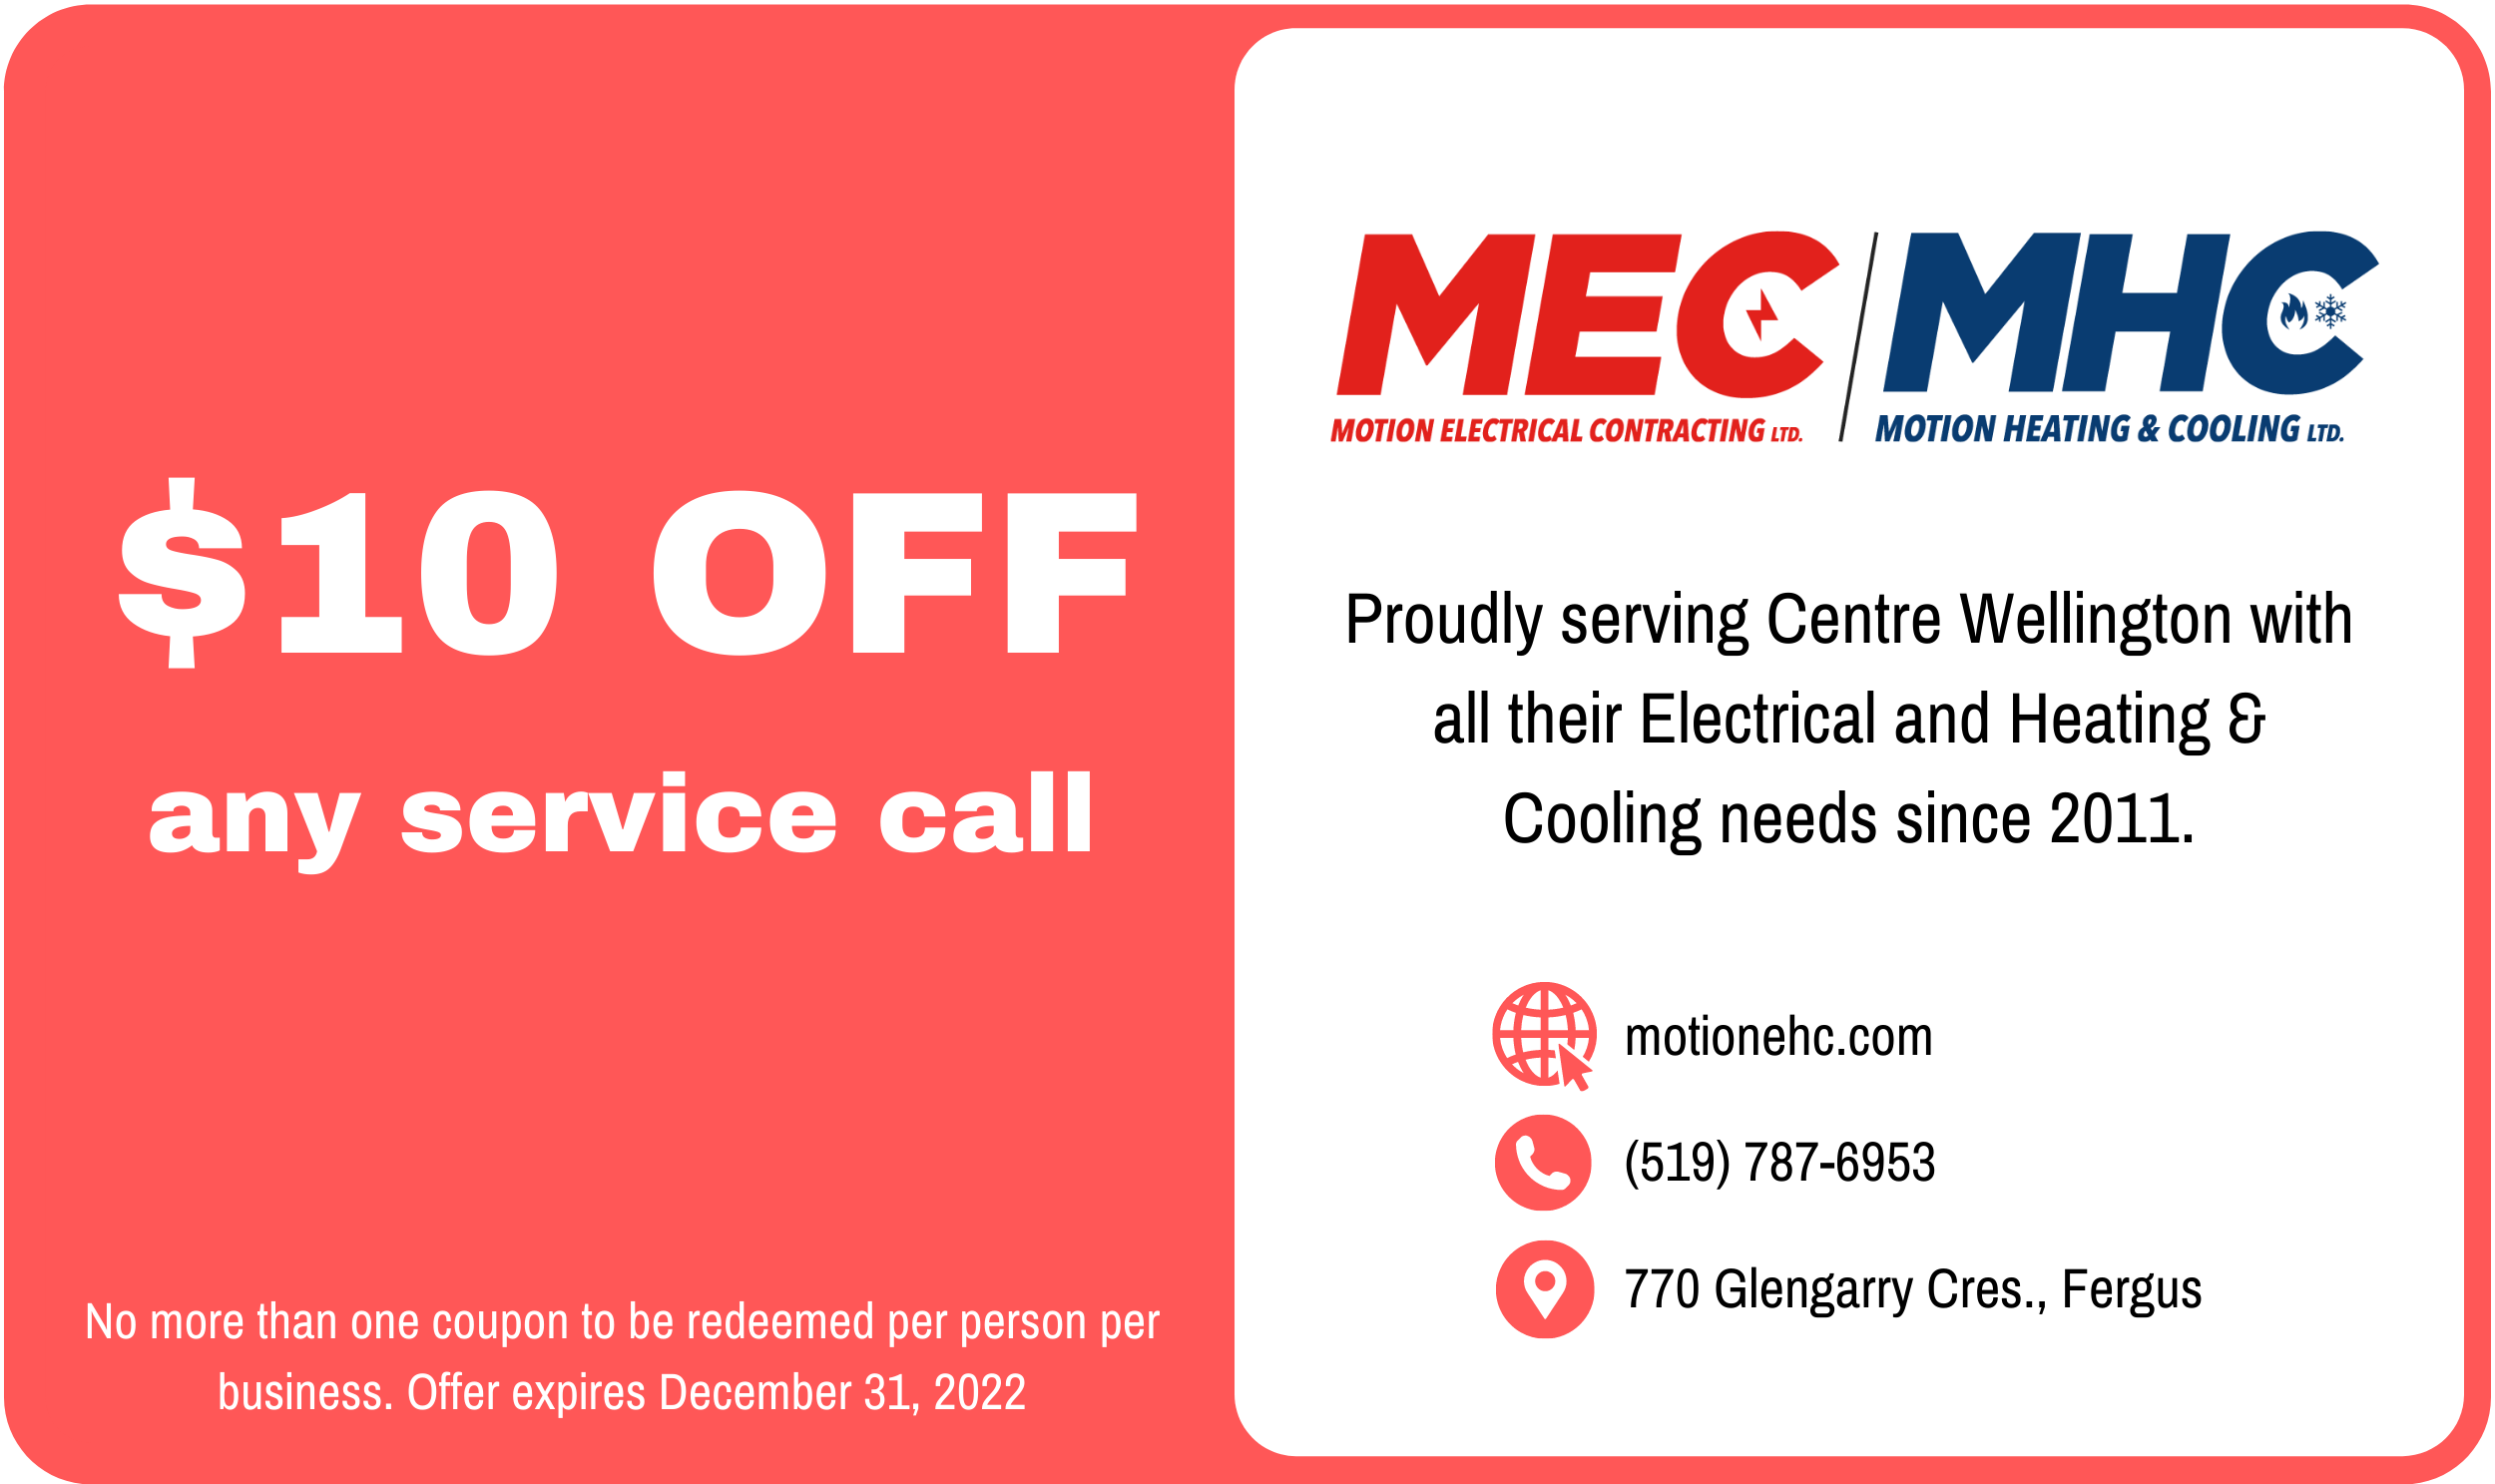 Motion Electrical Contracting